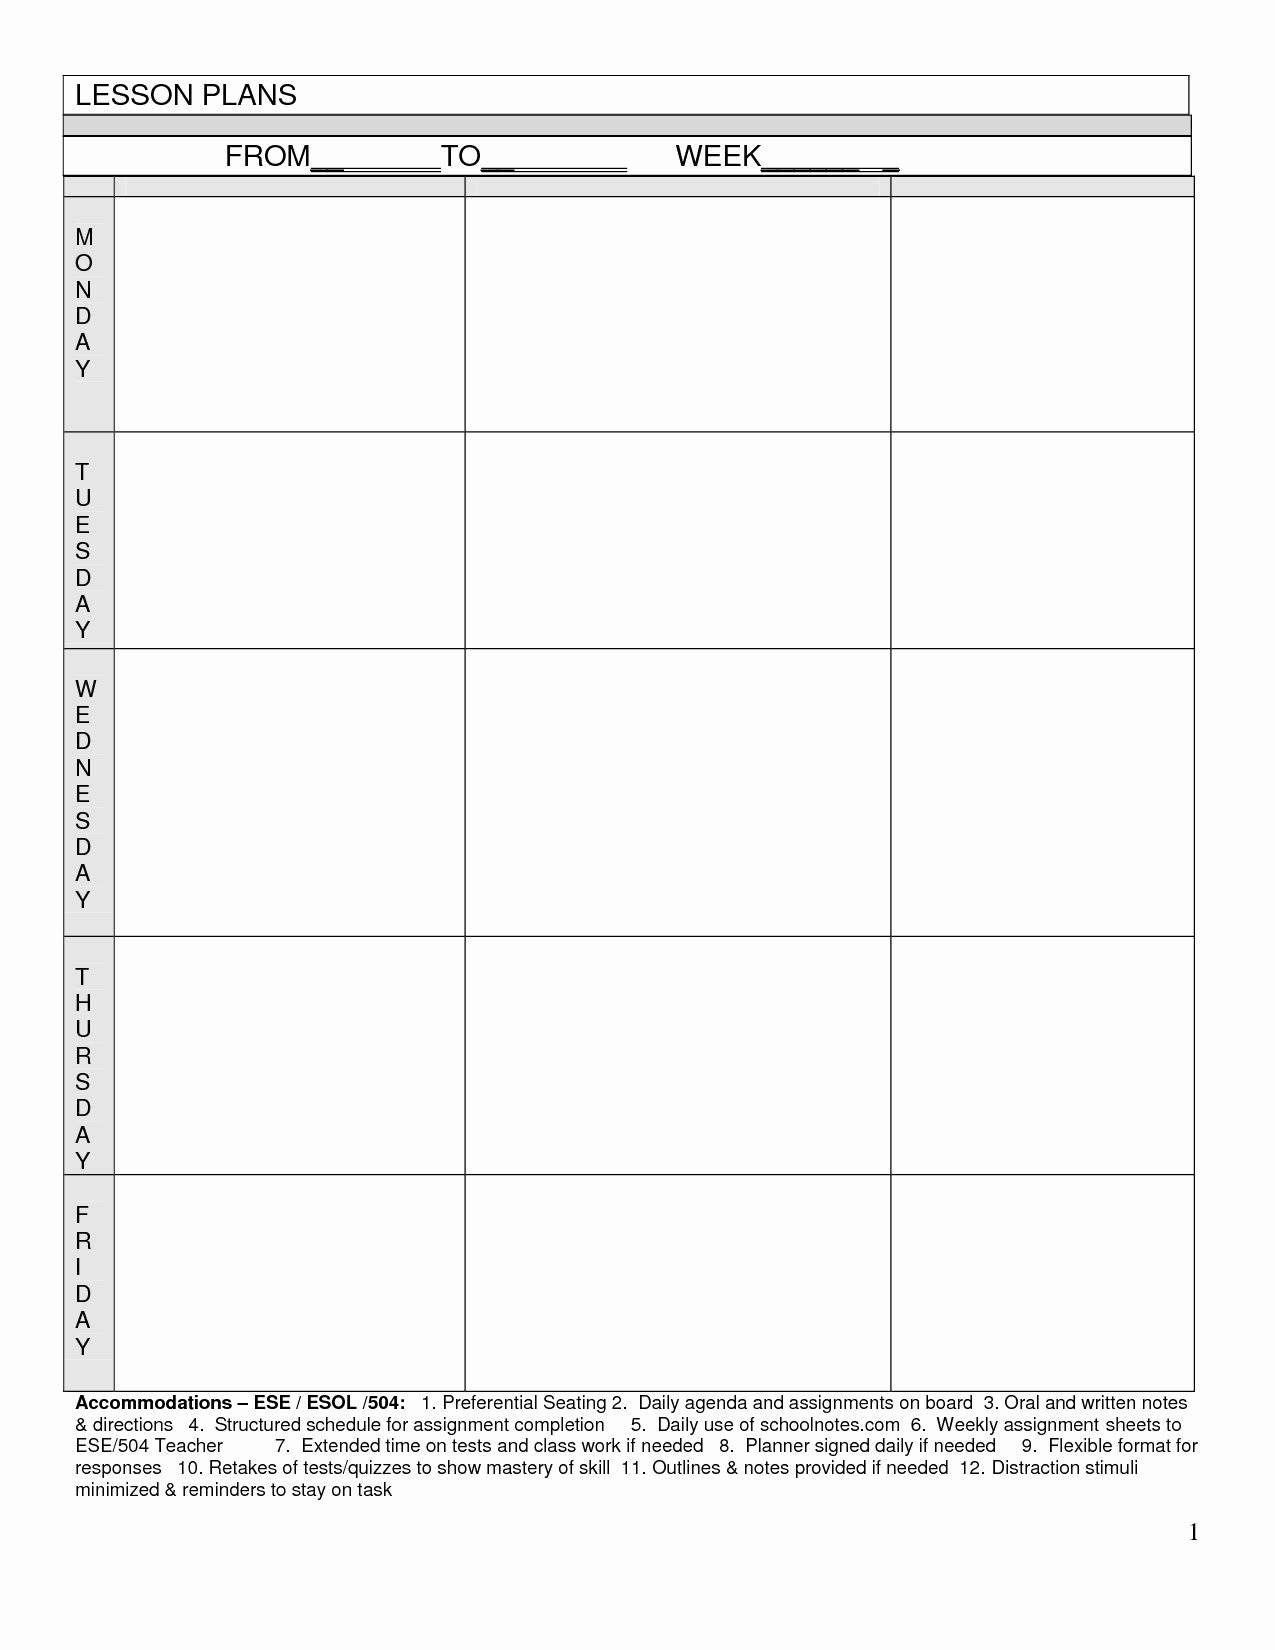 Balanced Literacy Lesson Plan Template Best Of Literacy Block Lesson Plan Template – Best My Literacy